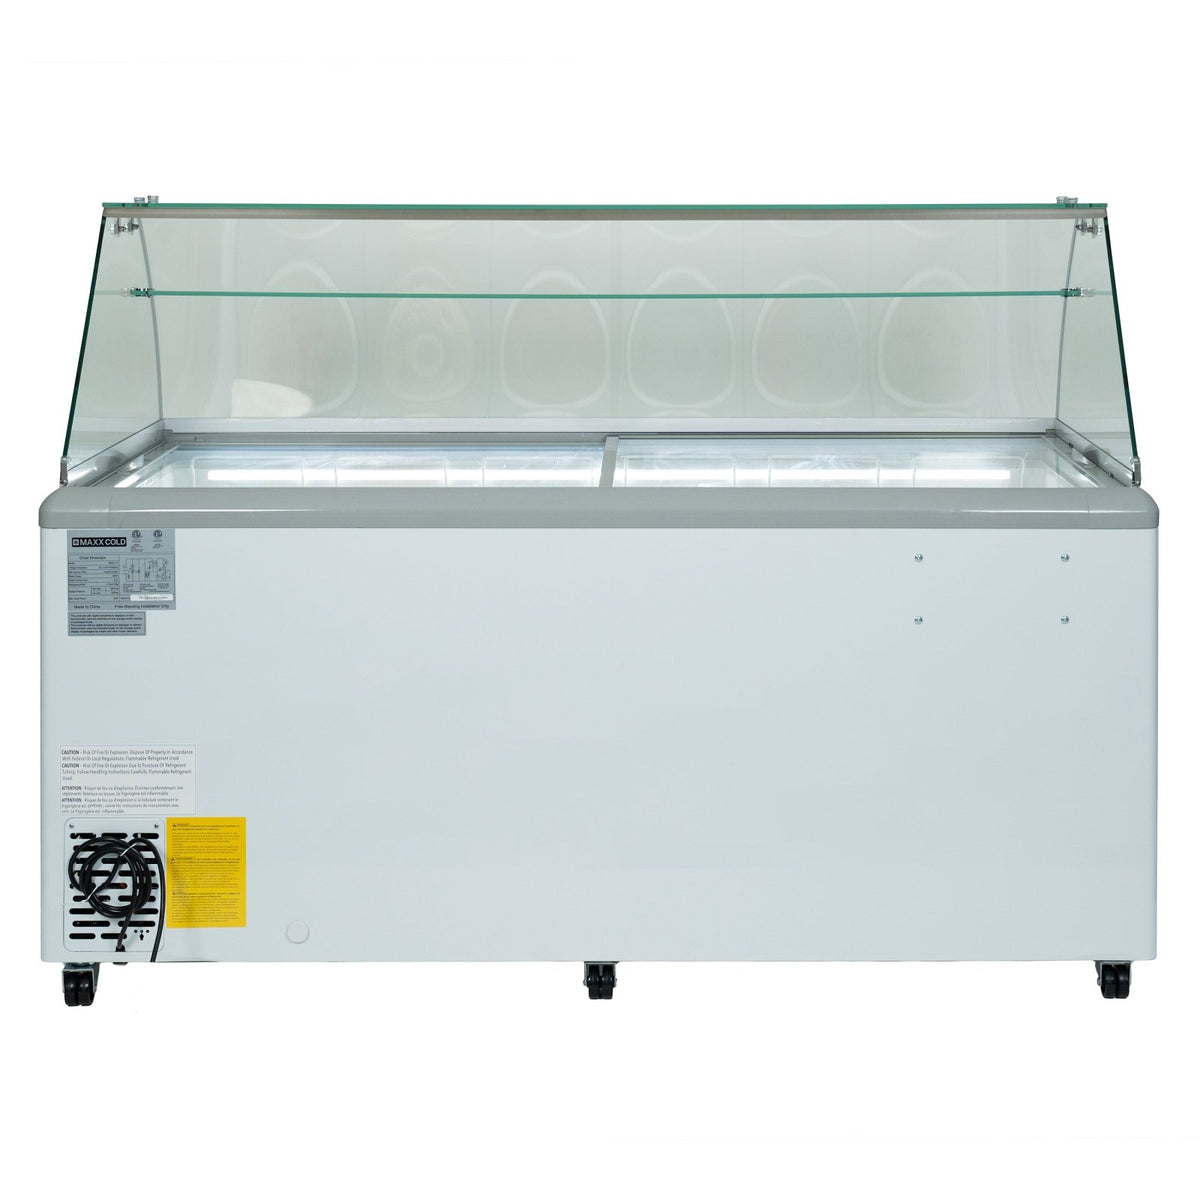 Maxx Cold MXDC - 12 X - Series Ice Cream Dipping Cabinet Freezer with Curved Glass Sneeze Guard, 70"W, 16 cu. ft. Storage Capacity, Holds up to - TheChefStore.Com